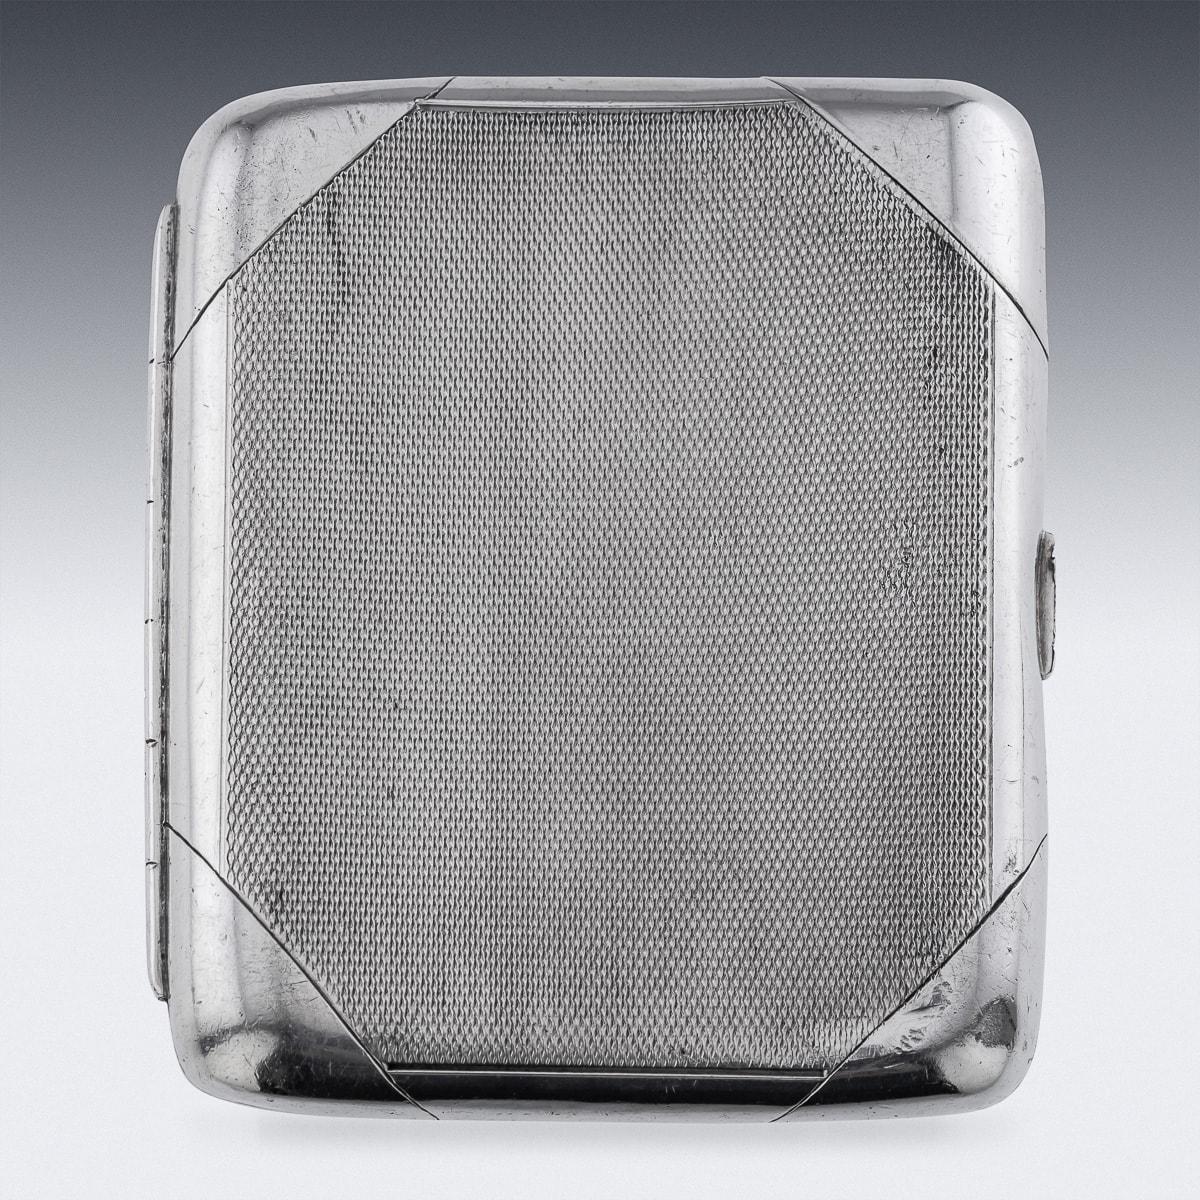 British Dunhill 20th Century Silver Plated Cigarette Case Shaped Hip Flask c.1920 For Sale